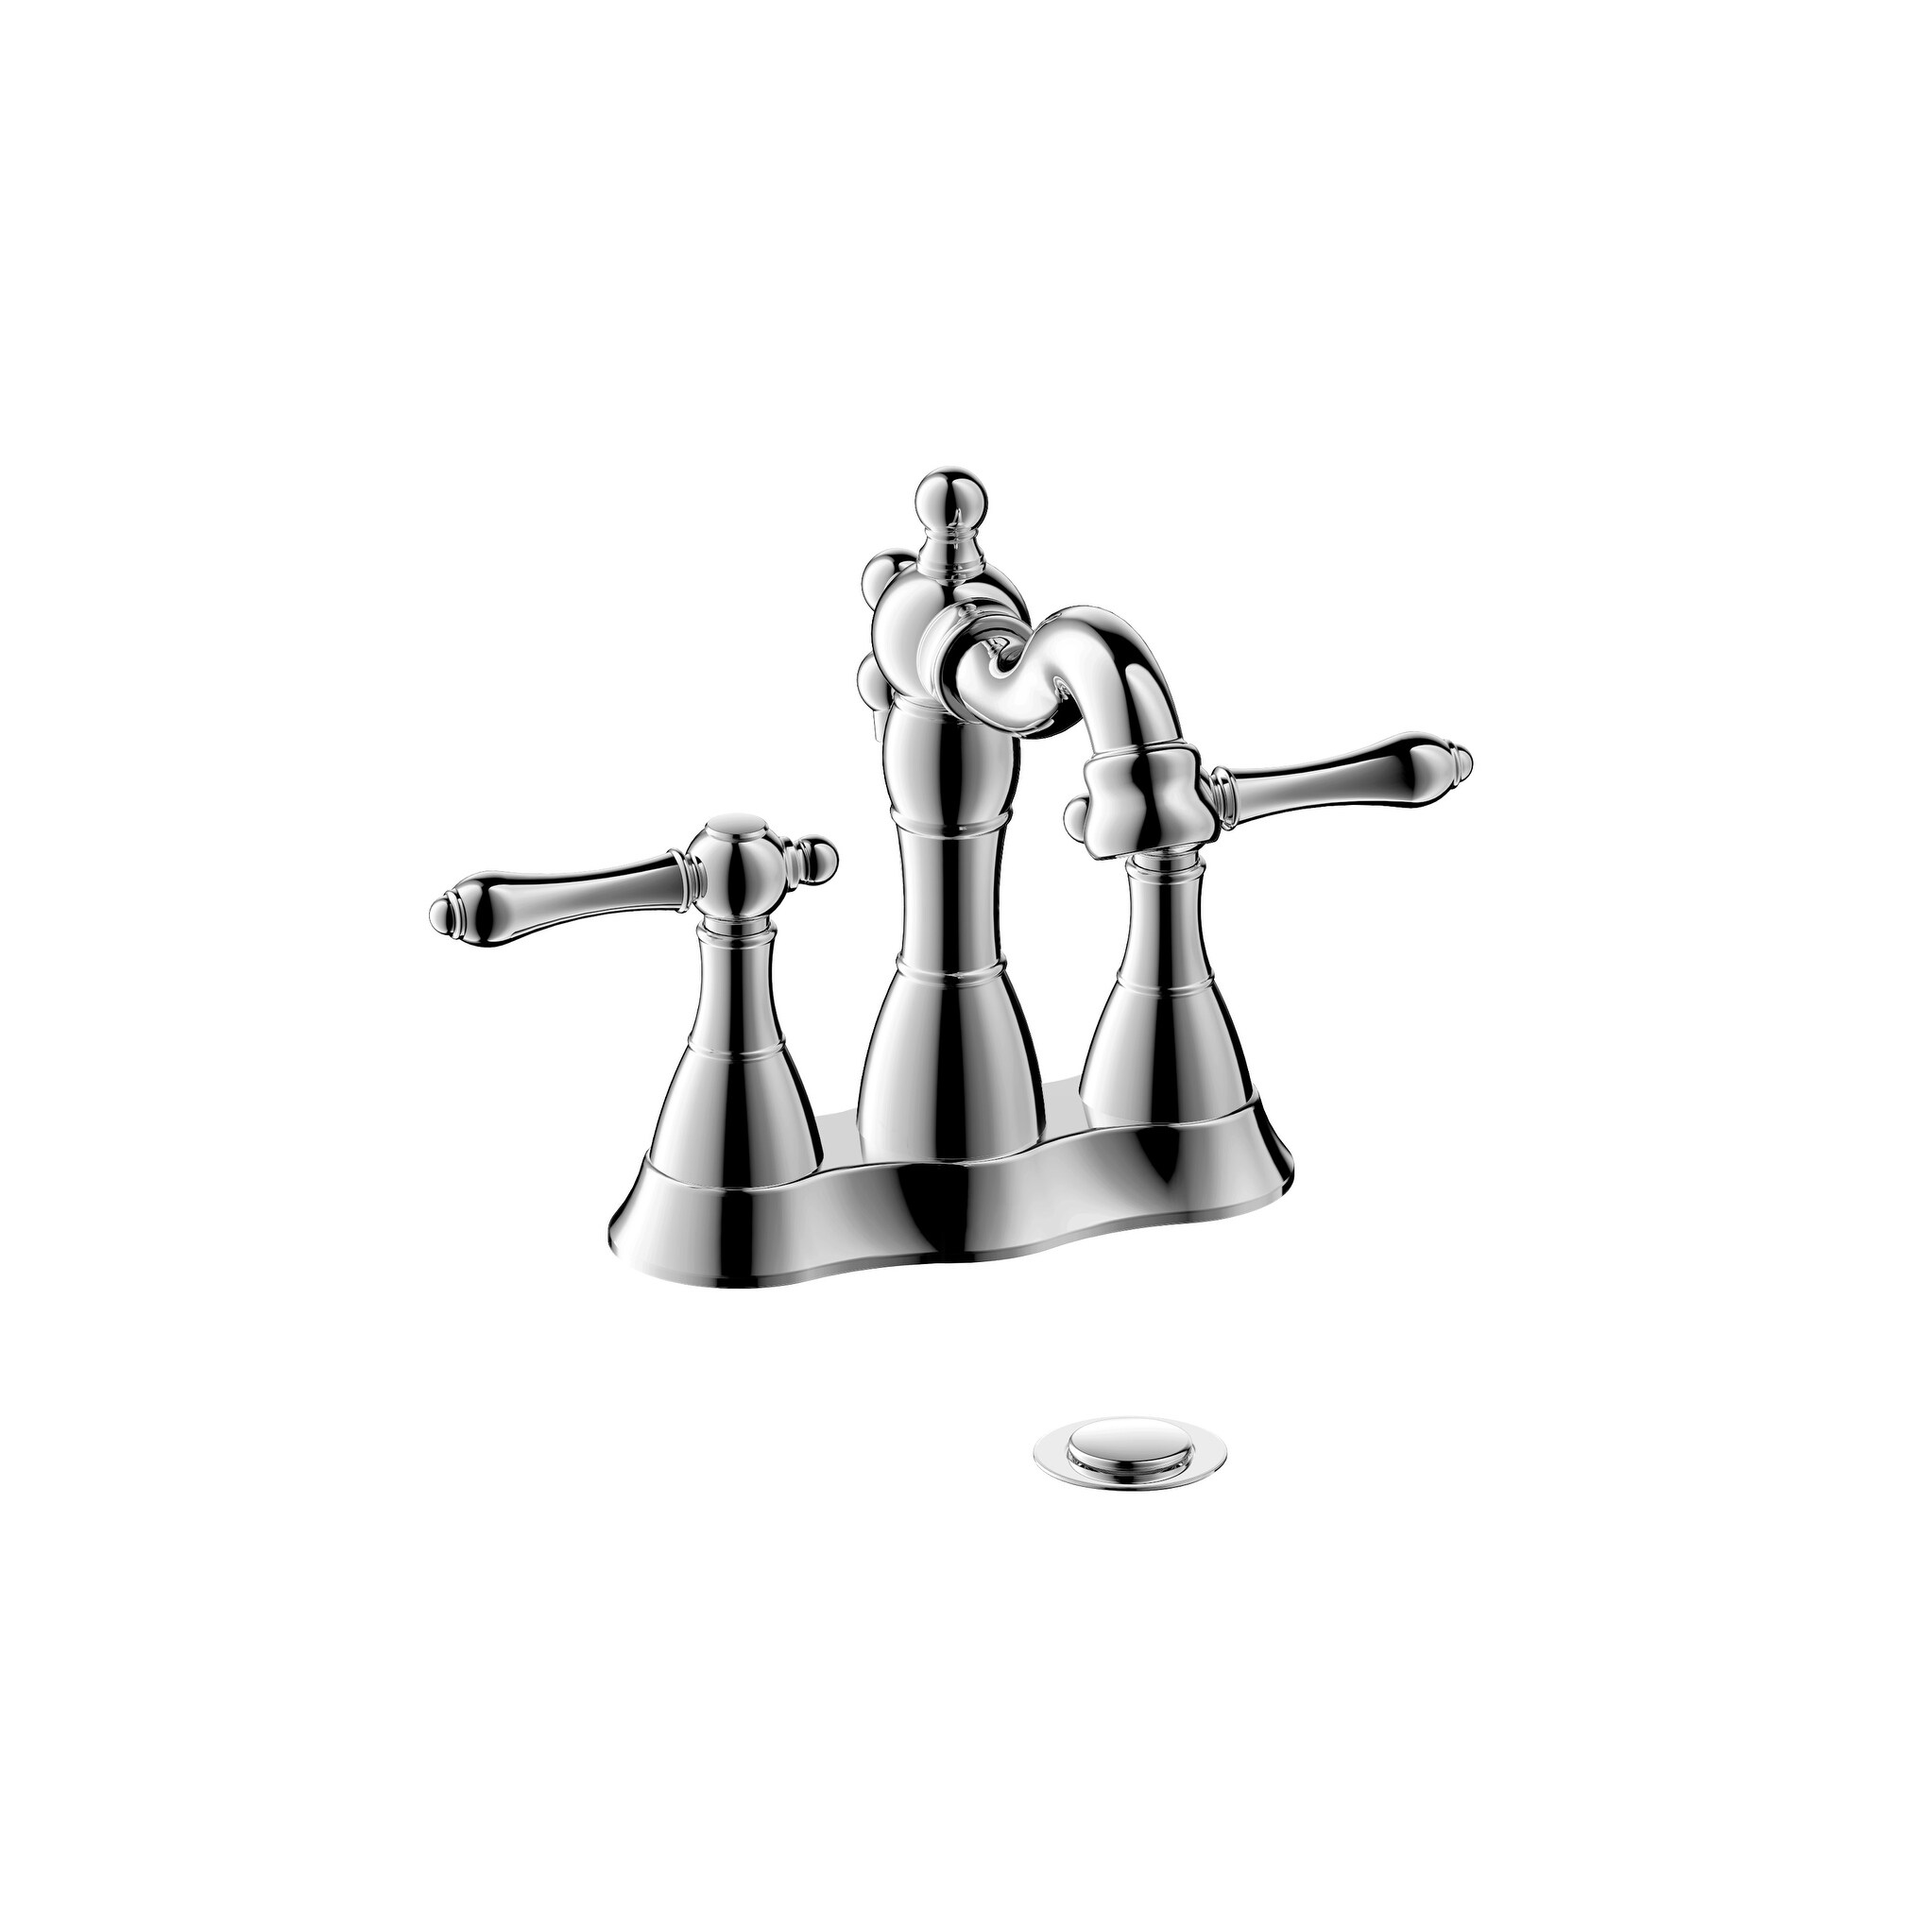 Ultra Faucets UF45213 Prime Two-Handle Centerset Bathroom Faucet, Brushed Nickel - image 2 of 4